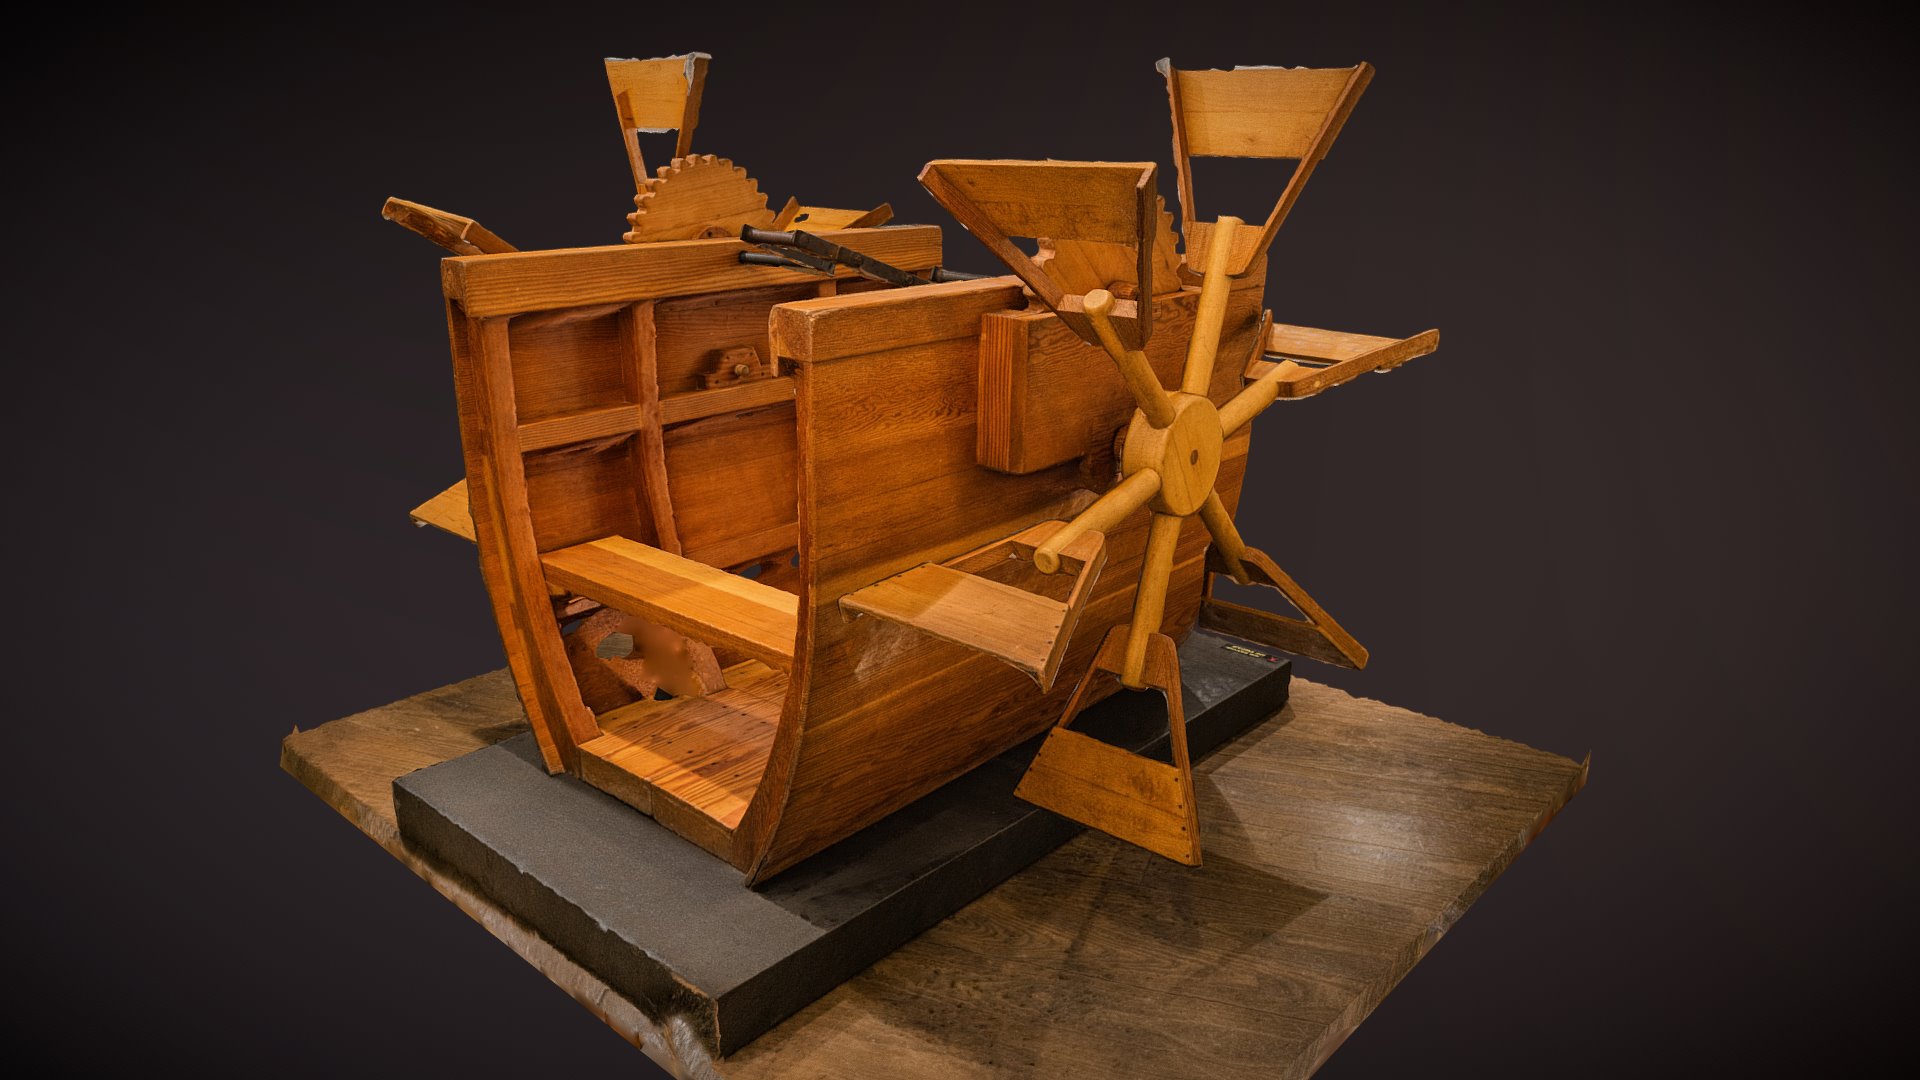 3D model Leonardo da Vinci Peddle Boat  scan - This is a 3D model of the Leonardo da Vinci Peddle Boat  scan. The 3D model is about a wooden structure made of wood.